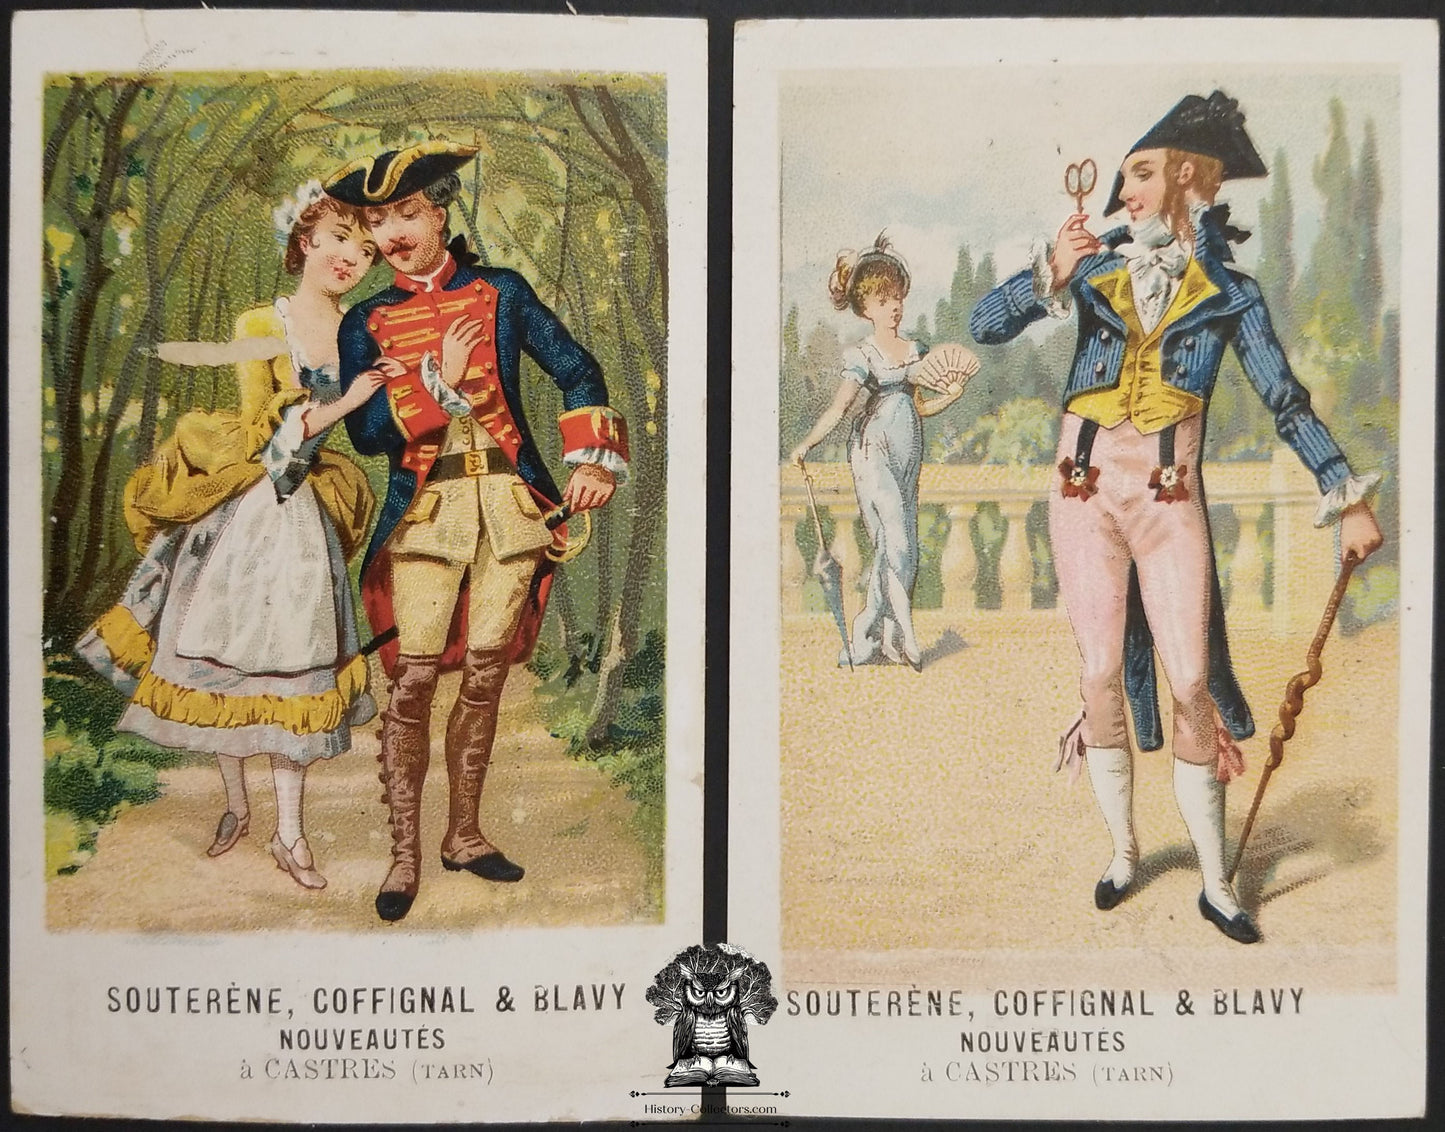 Antique French Advertising Trade Card Lot x2 - Souterene Coffignal & Blavy